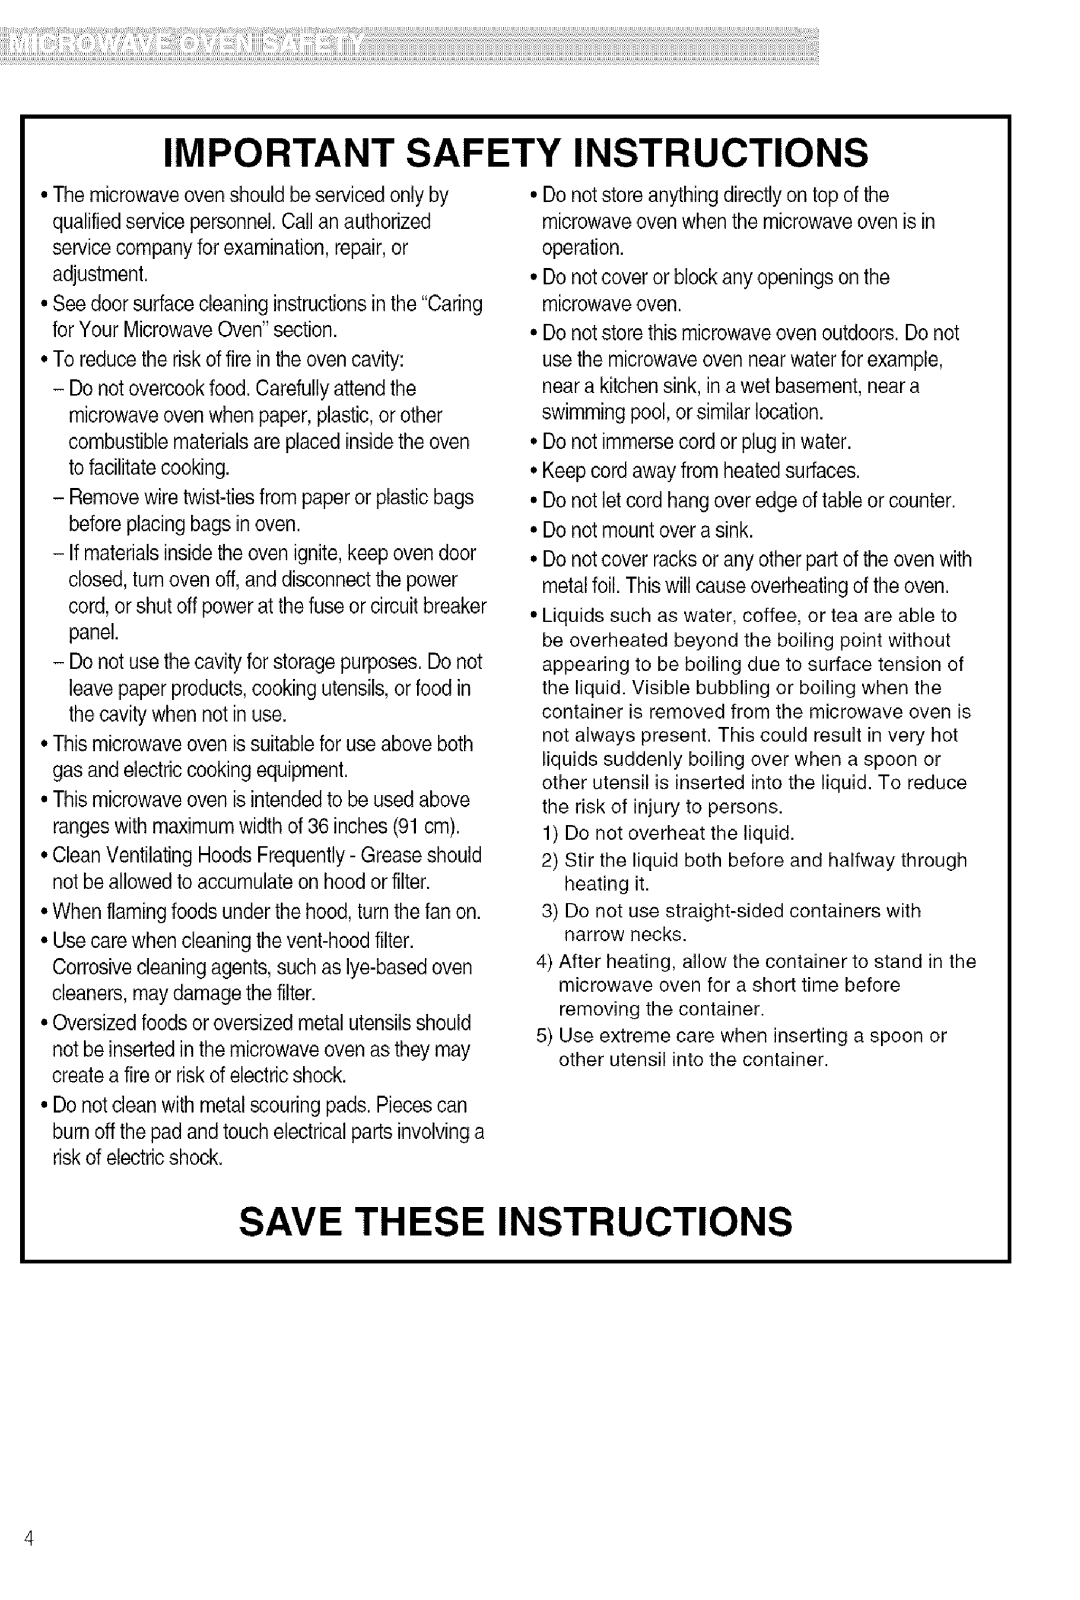 Kenmore 721.80603 Important Safety Instructions, Save These Instructions, To reducethe riskof fire in the oven cavity 